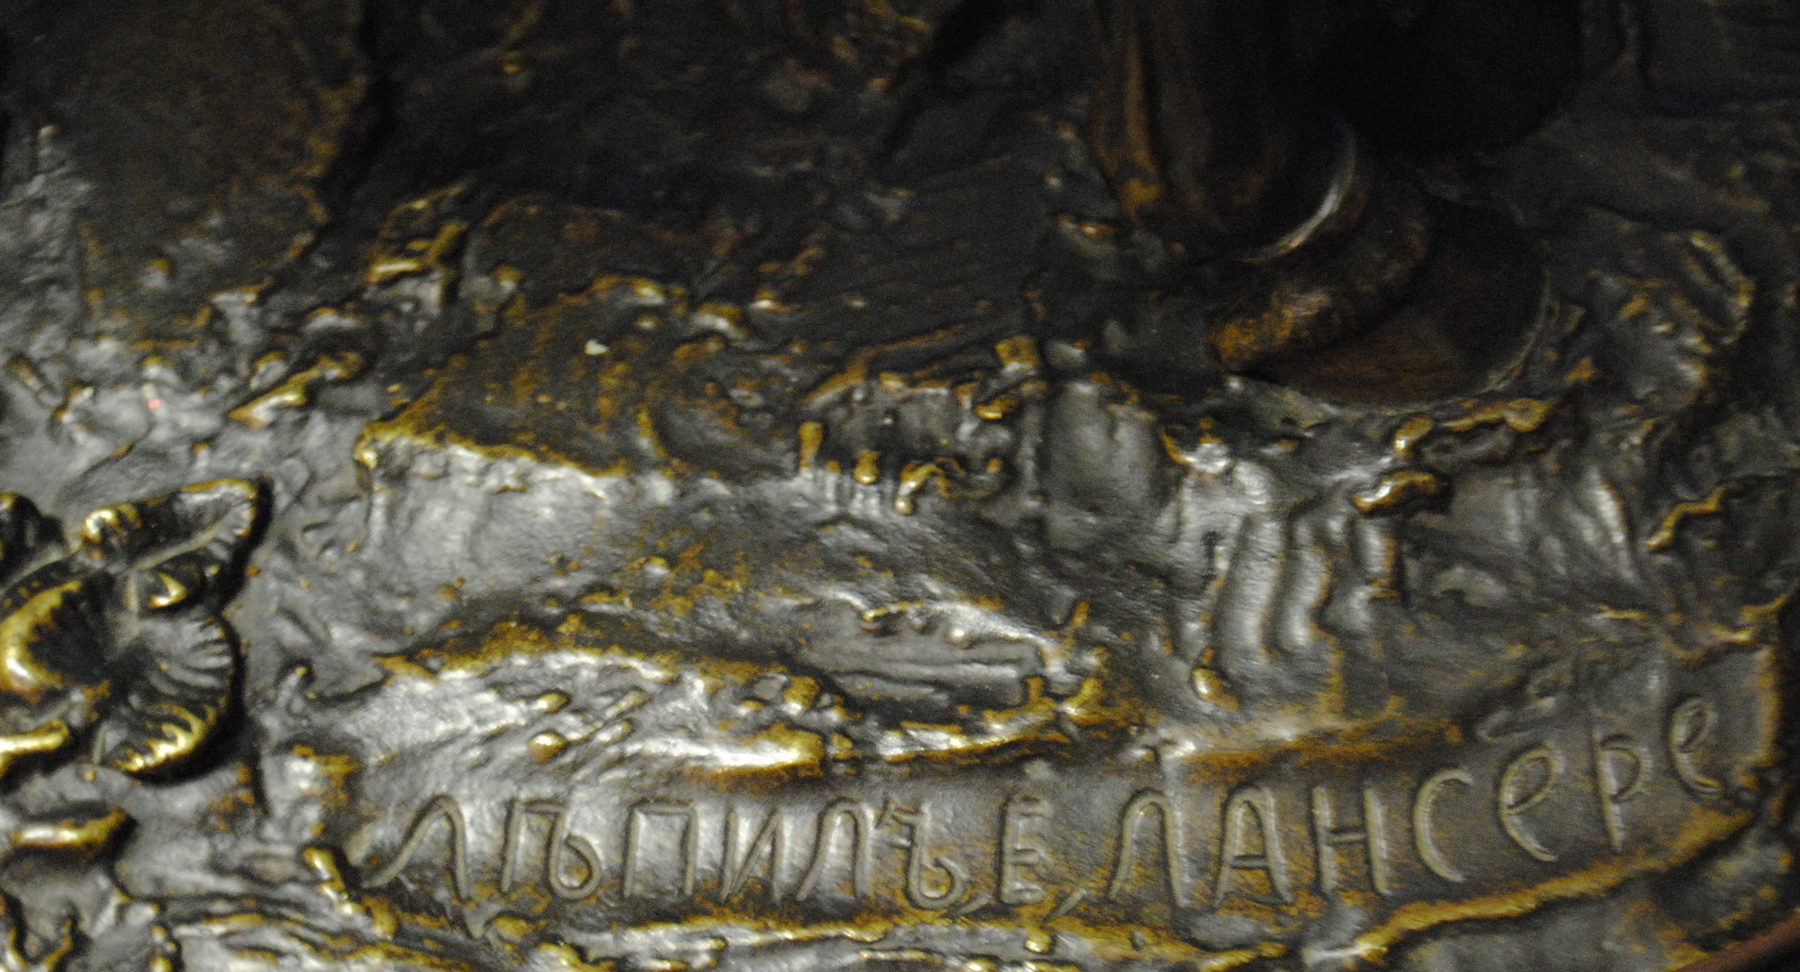 AFTER A MODEL BY EVGENY LANCERAY, INSCRIBED WITH A SIGNATURE IN CYRILLIC, CHOPIN FOUNDRY MARK